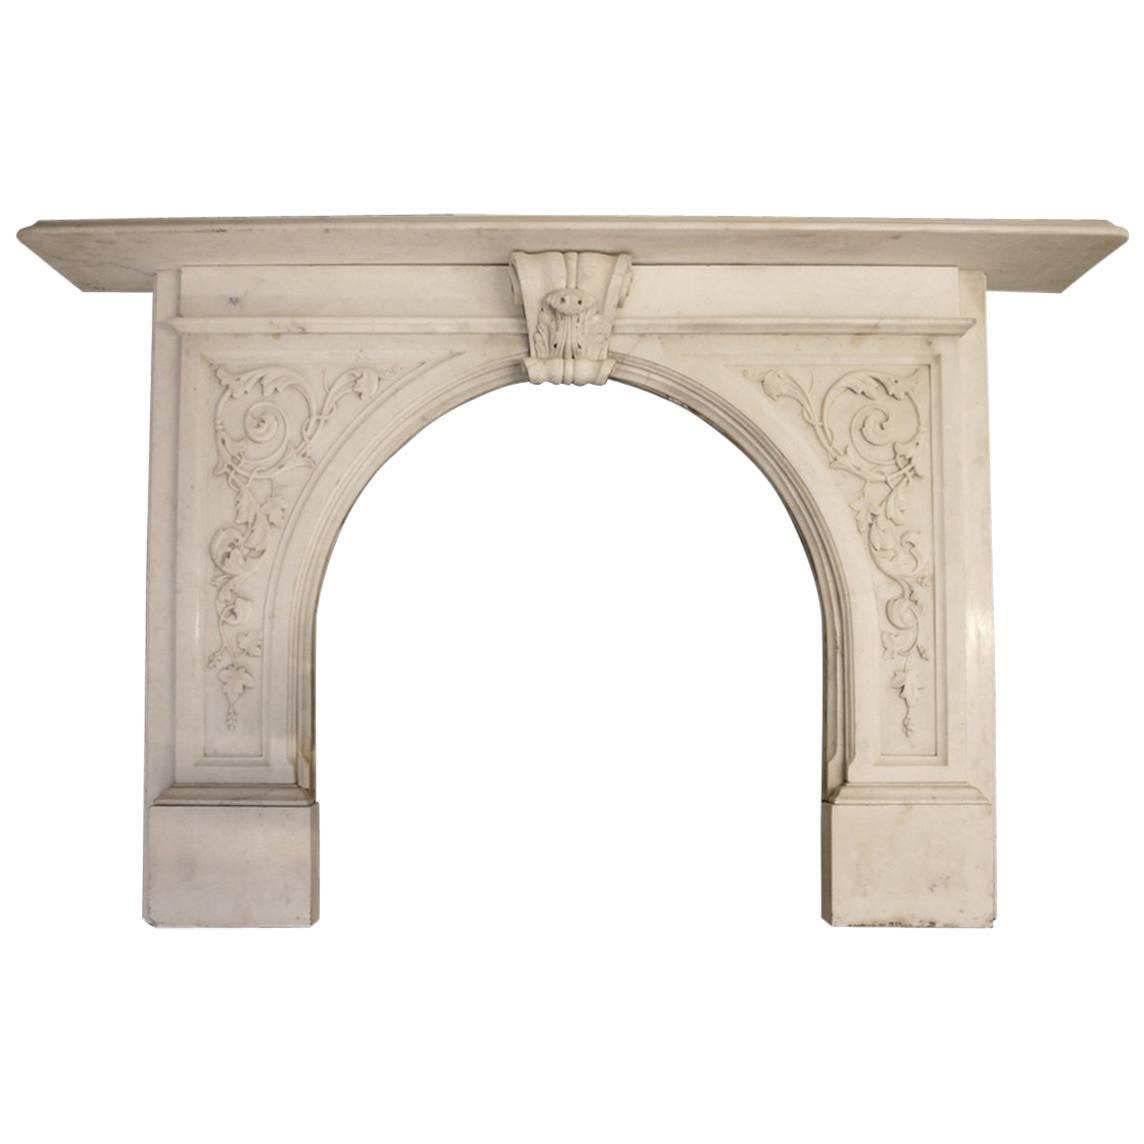 Antique Victorian Carved Statuary Marble Fire Surround with Arched Aperture